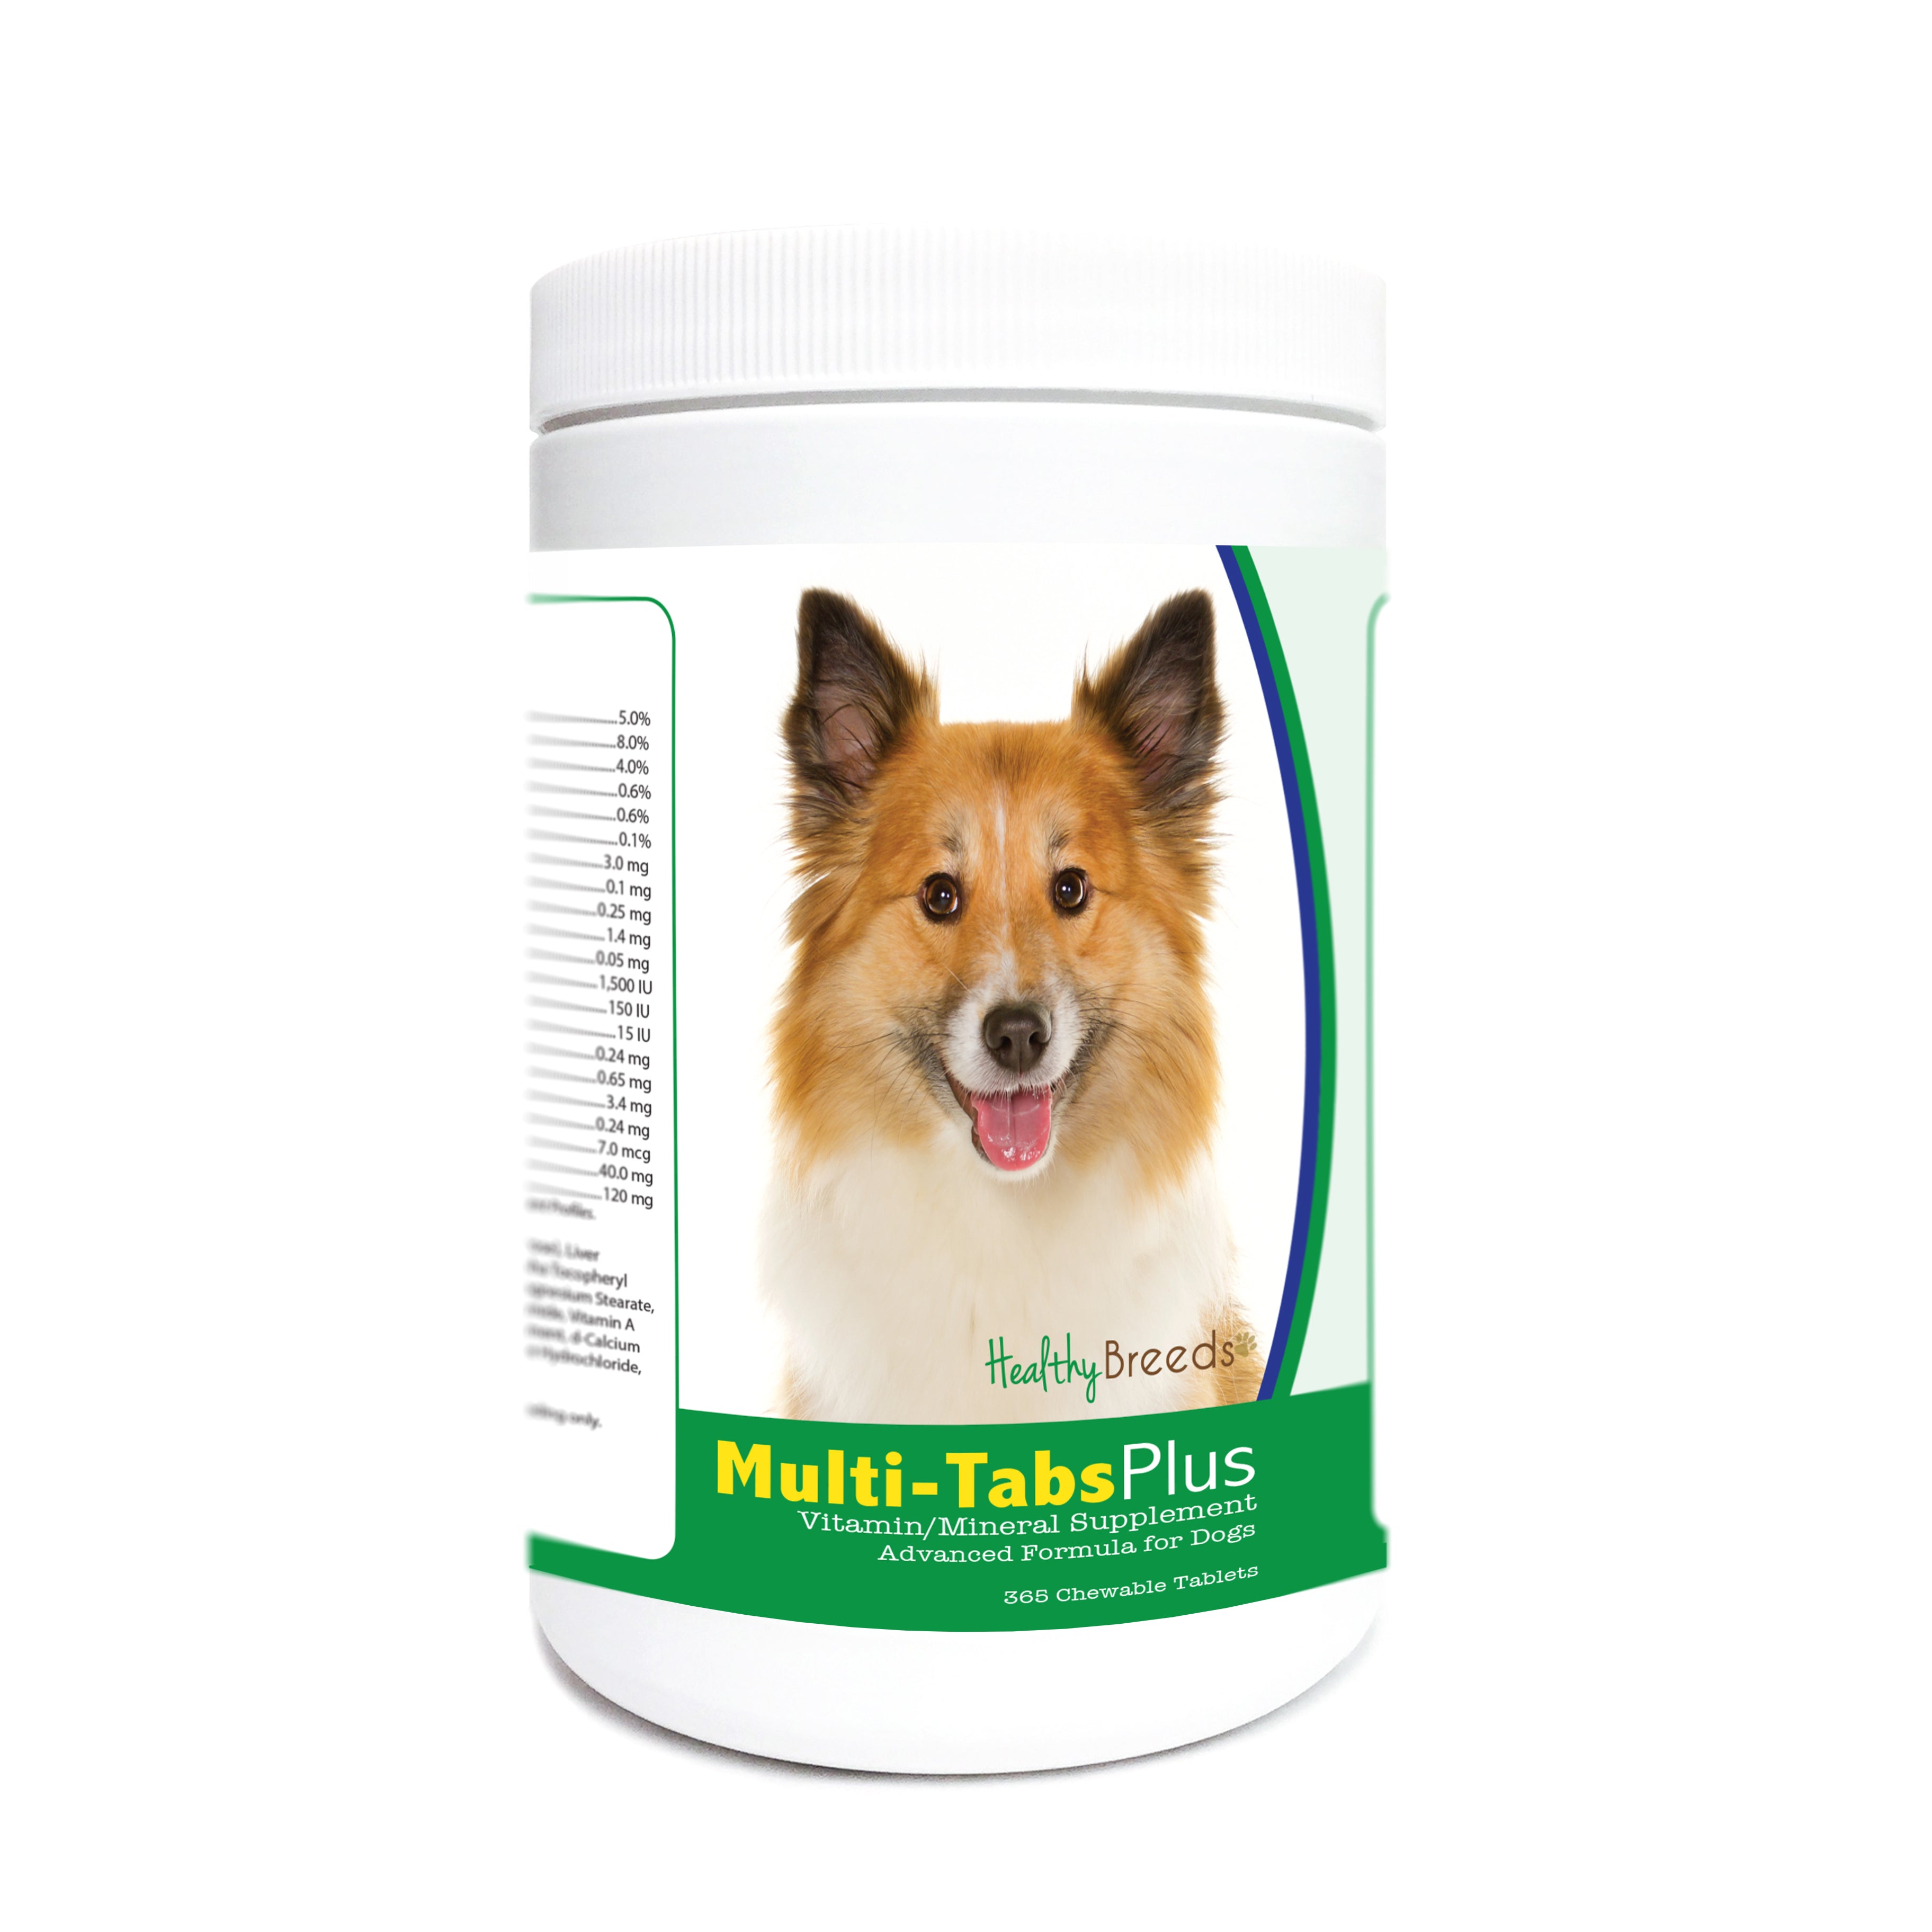 Icelandic Sheepdog Multi-Tabs Plus Chewable Tablets 365 Count